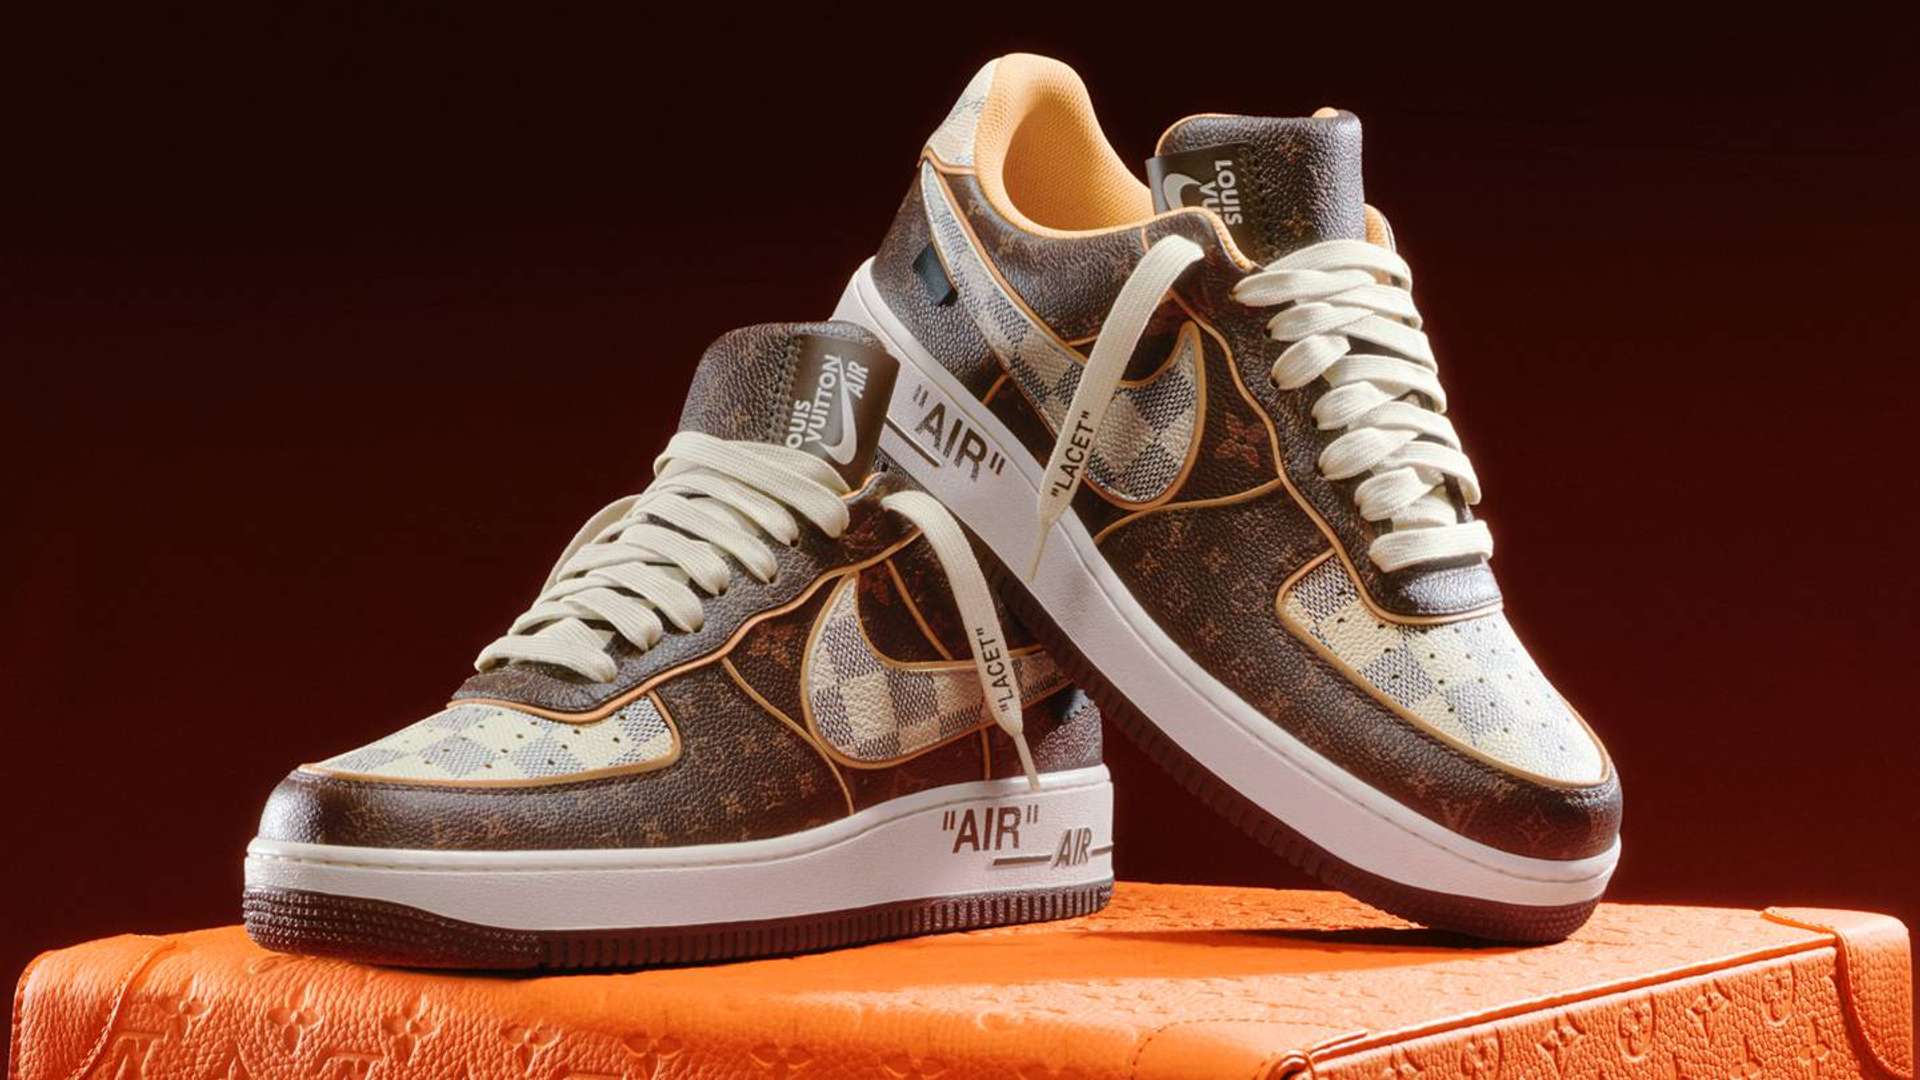 A pair of trainers covered with the Louis Vuitton monogram rested on top of an orange Louis Vuitton trunk